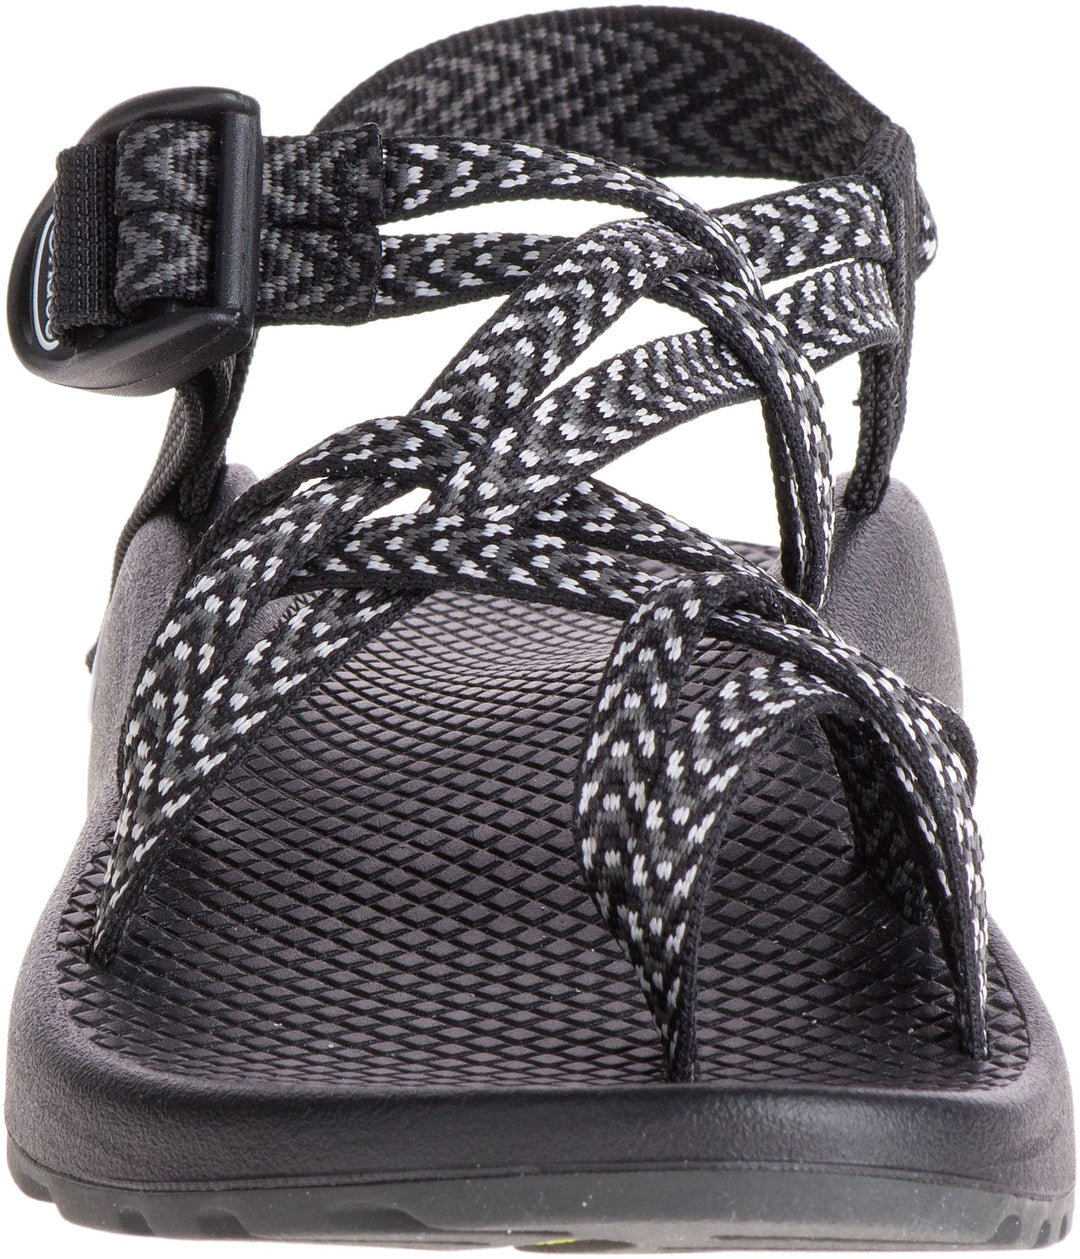 Women's Chaco ZX/2 Classic Color: Boost Black (WIDE WIDTH) 6